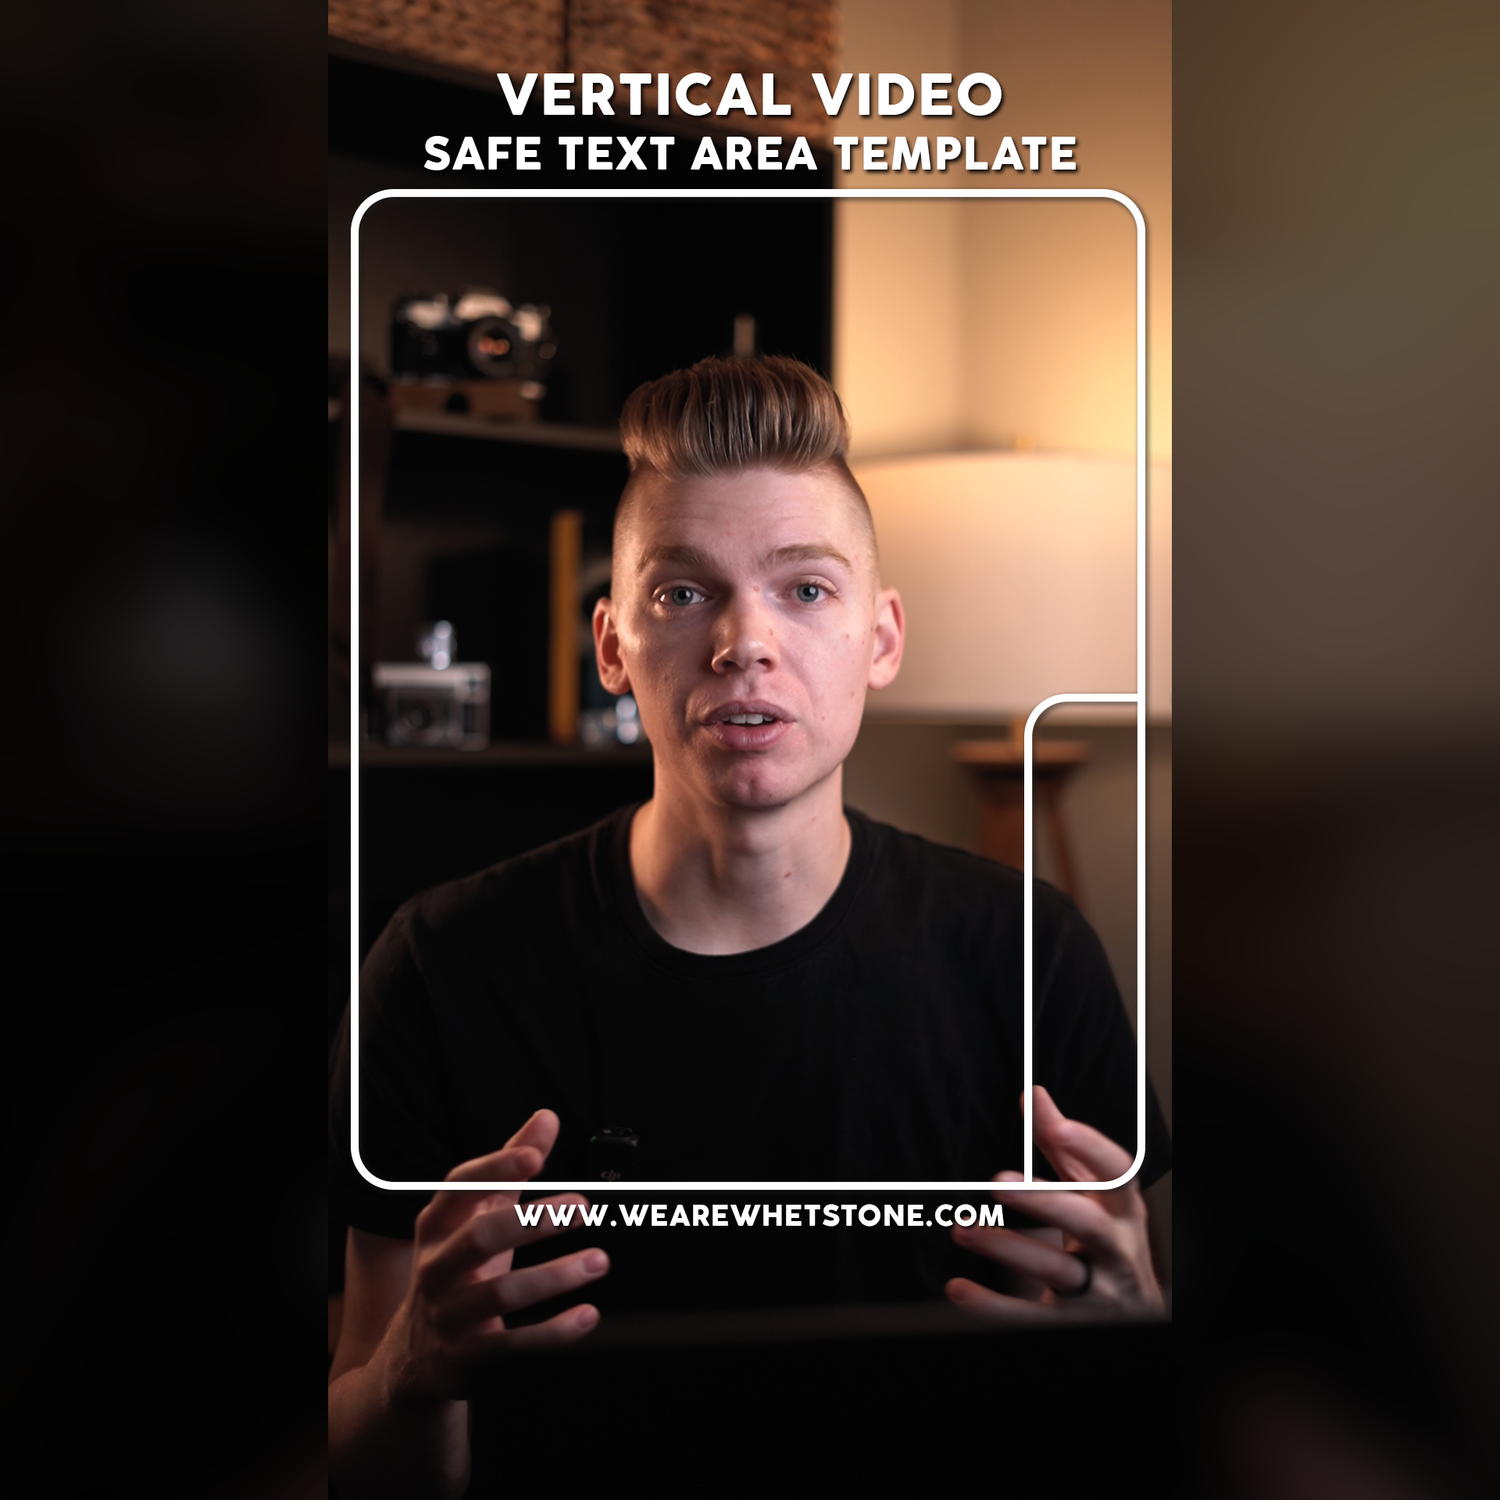 Vertical Video - Safe Zone Text Area Template ( Shorts